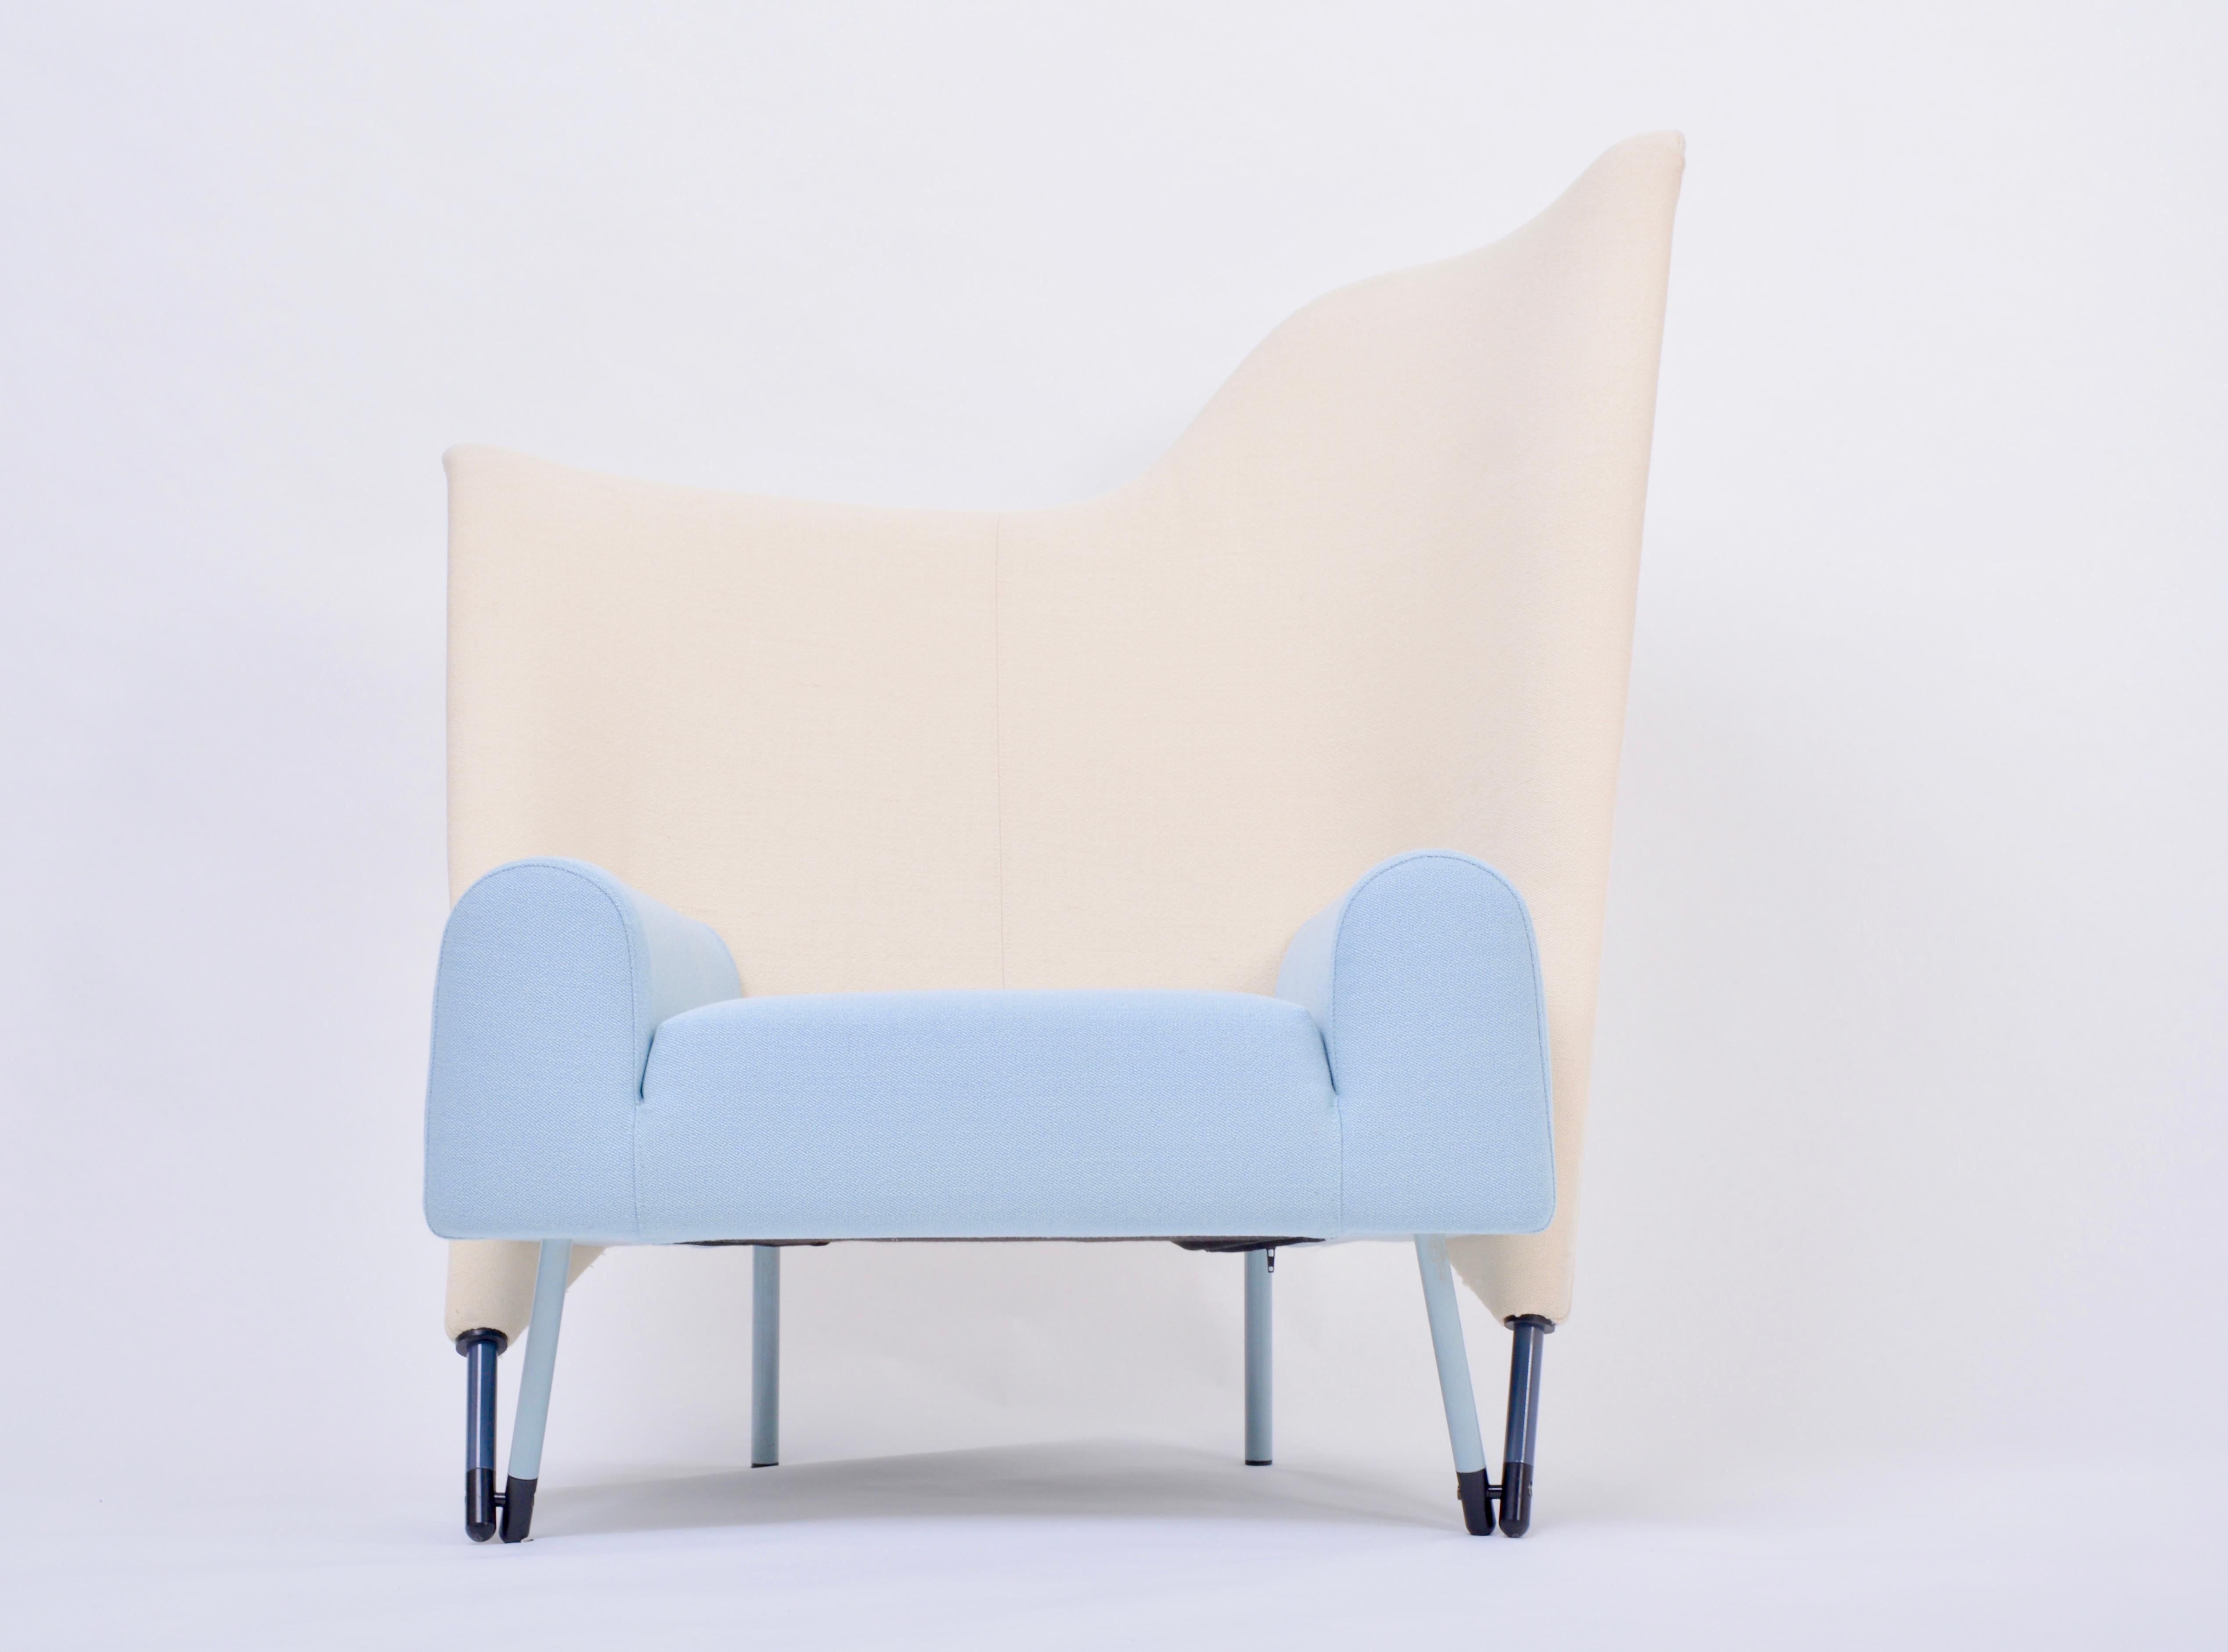 Reupholstered Torso Lounge Chair Designed by Paolo Deganello
The Torso lounge chair was designed by Paolo Deganello in 1982 and was produced for Cassina.
With its' asymmetric and sculptural backrest and two color scheme it is a true statement